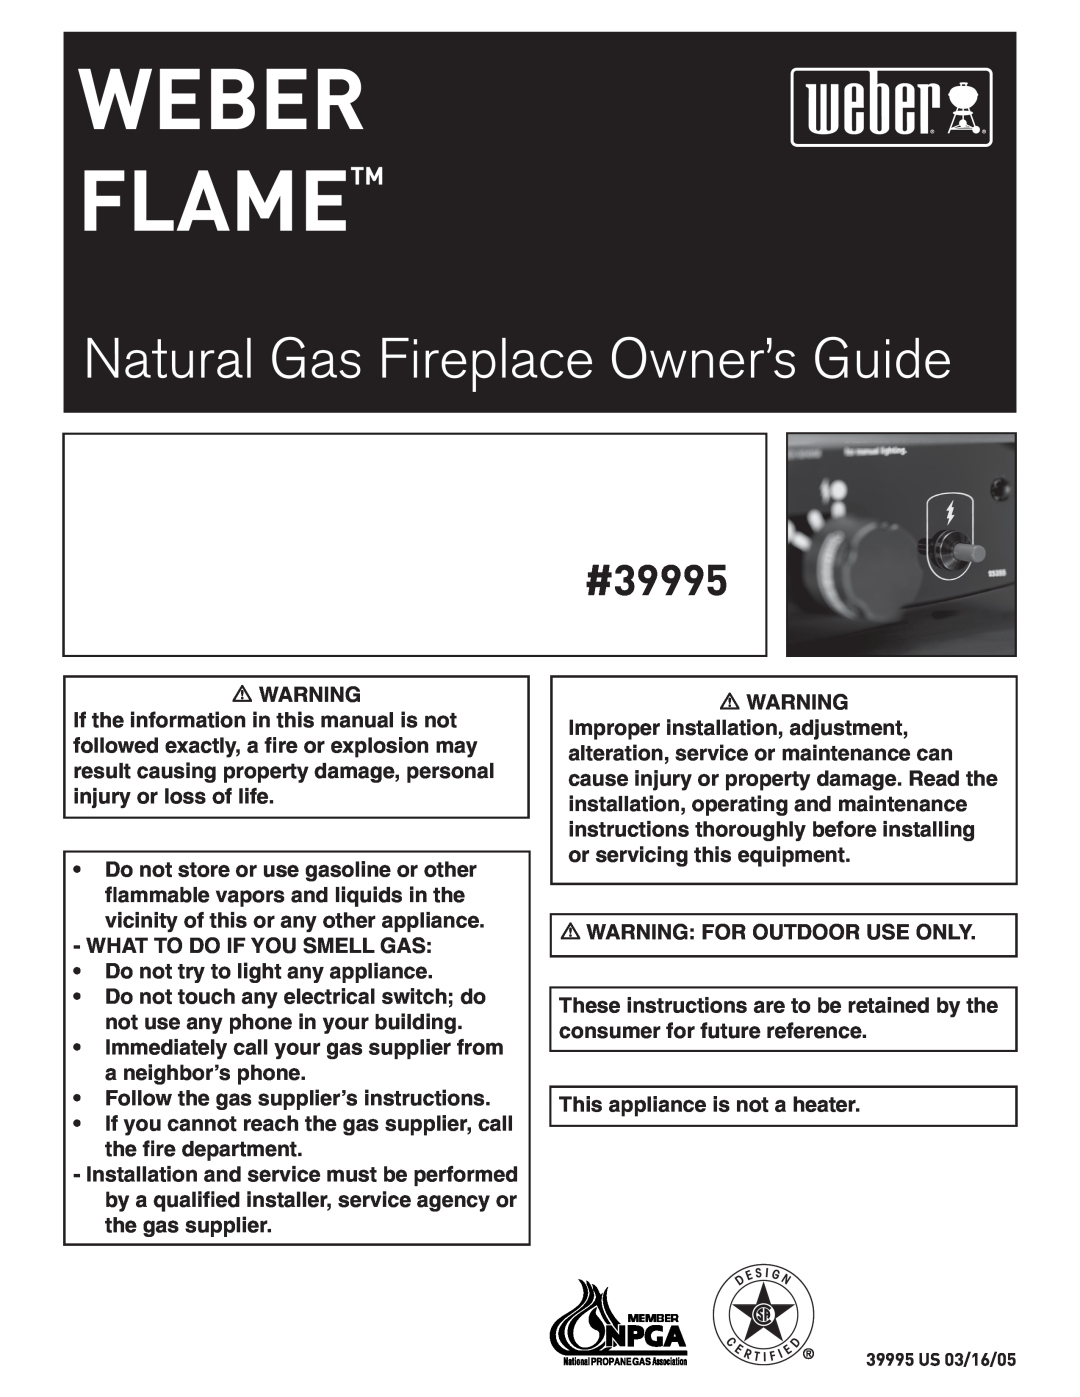 Weber FLAME manual Weber Flametm, Natural Gas Fireplace Owner’s Guide, #39995 